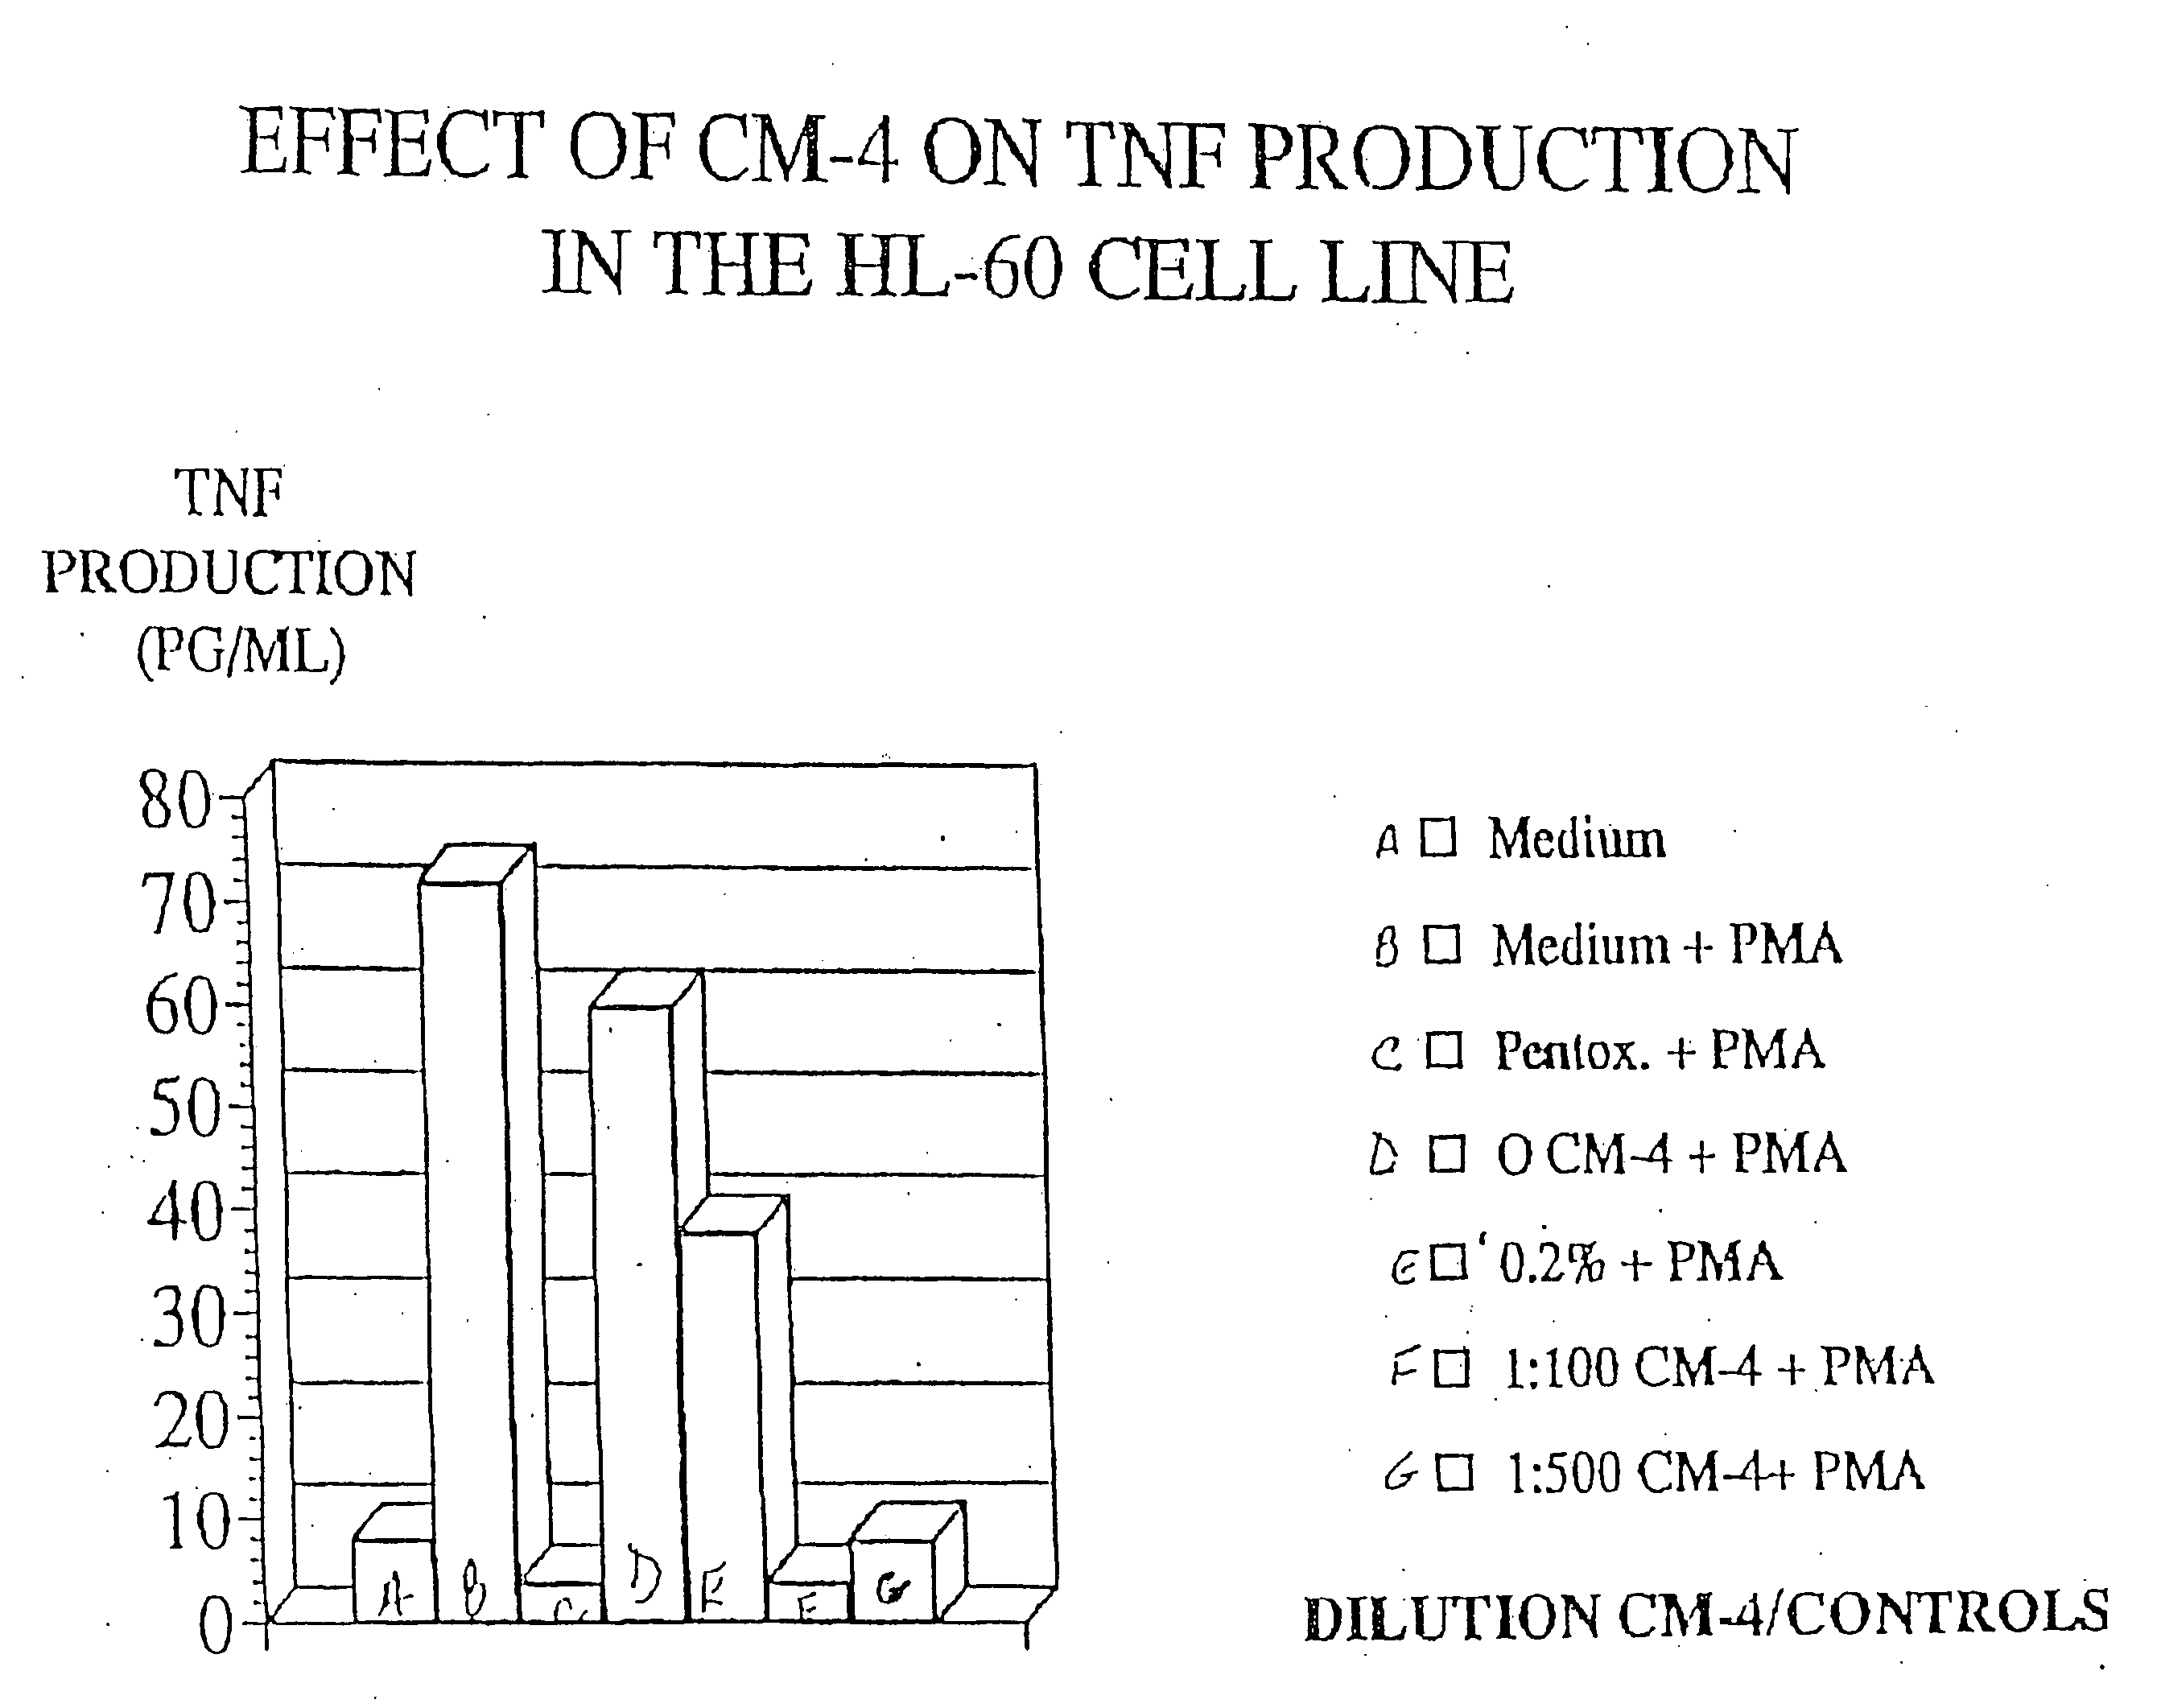 Compositions of eleutherosides capable of modulating protein expresion